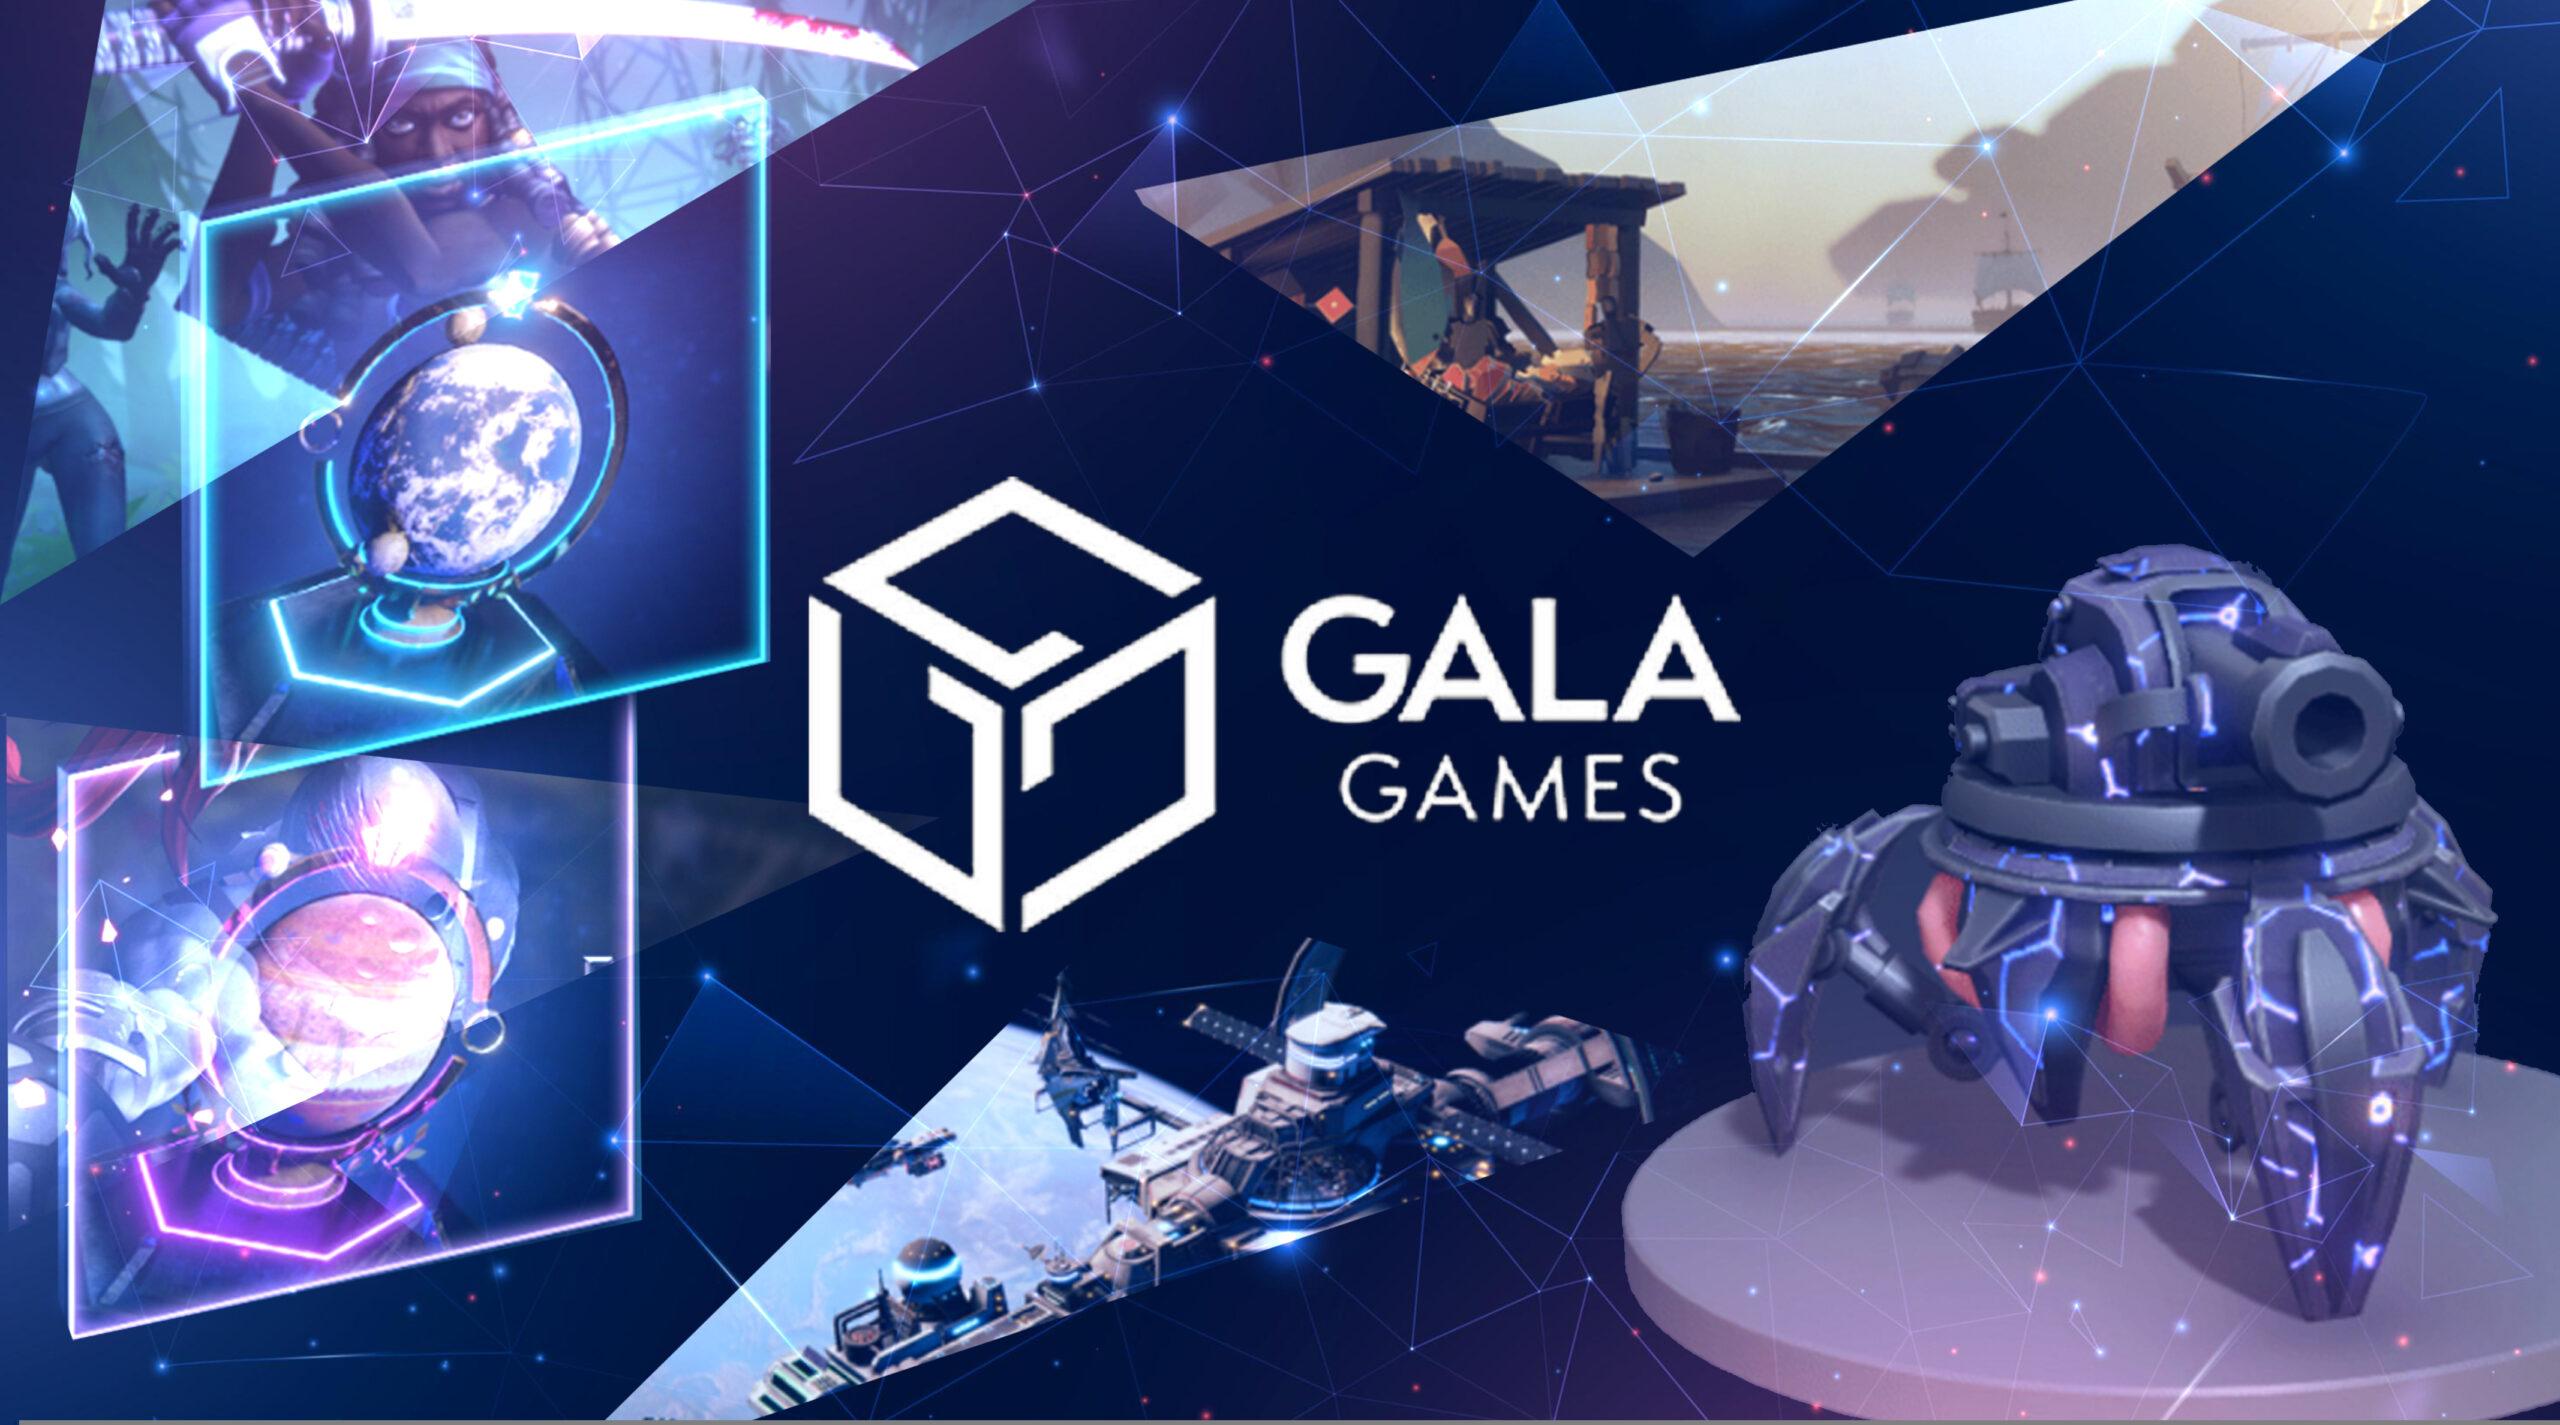 Web3 Gaming:  Prime Partnership, Galaxy Fight Club 3.0, GameOn  Funding, Elixir's Acquisition, and Faraland's Mastery Quest 2 - Play to  Earn Games News